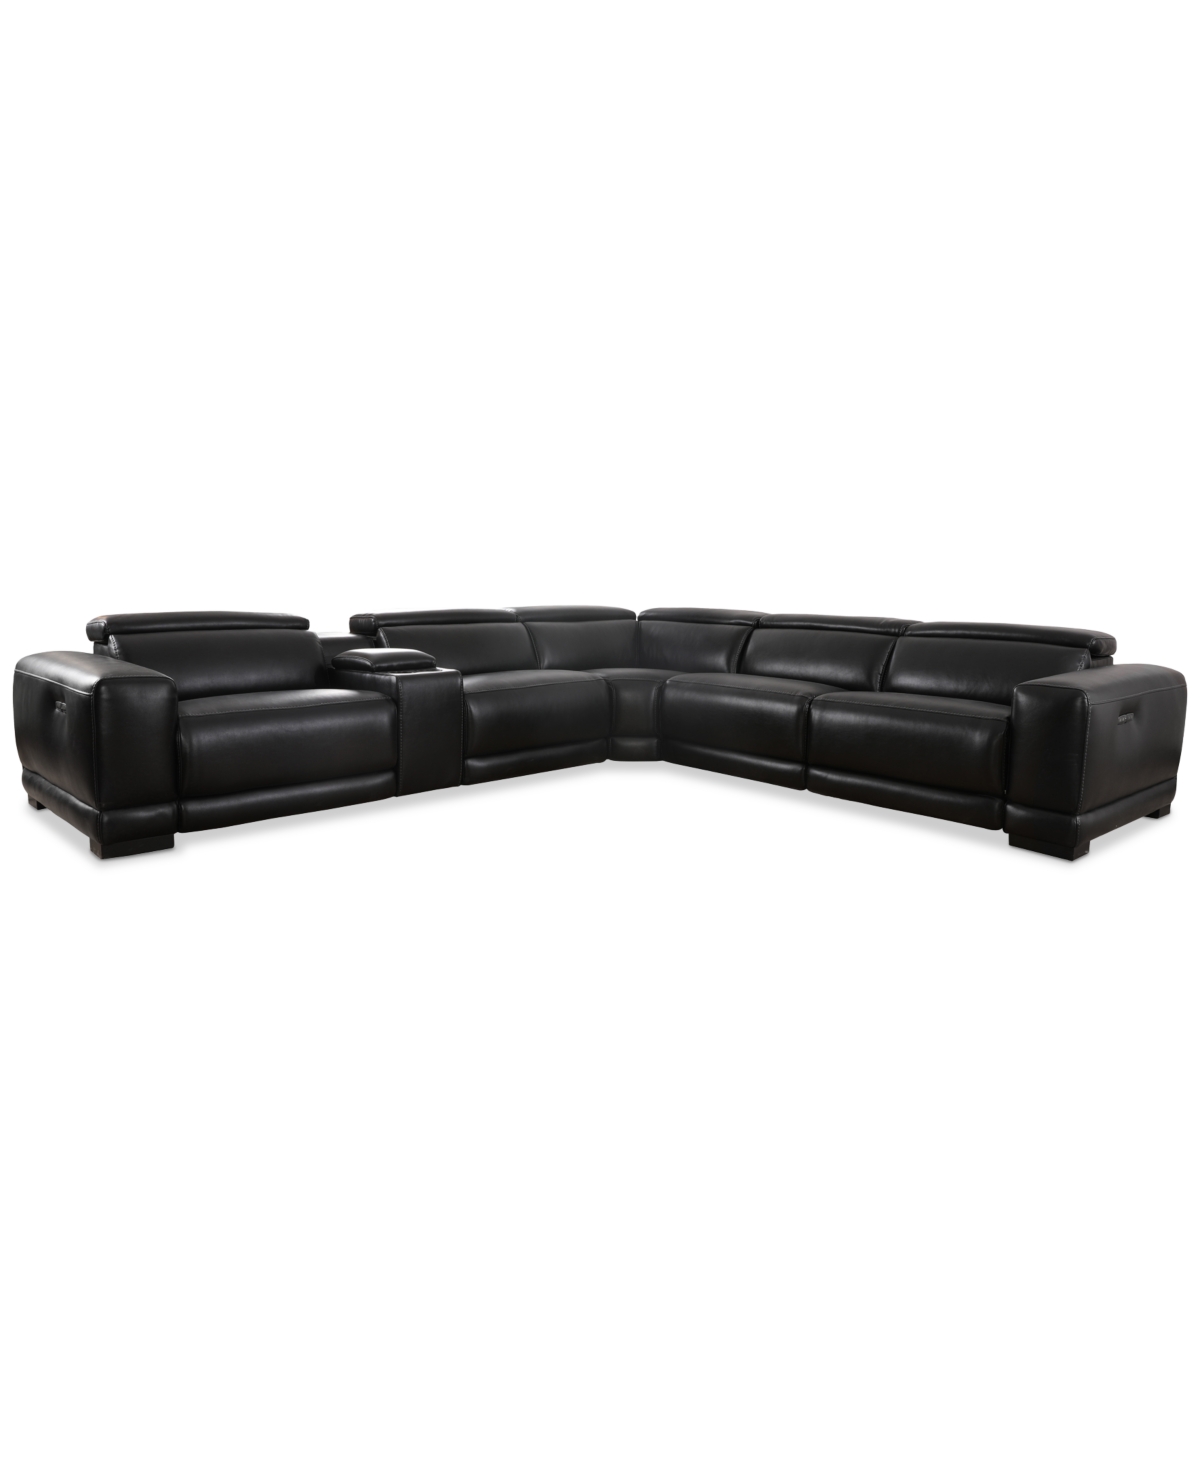 Furniture Krofton 6-pc. Beyond Leather Fabric Sectional L With 3 Power Motion Recliners And 1 Console, Created In Blackberry